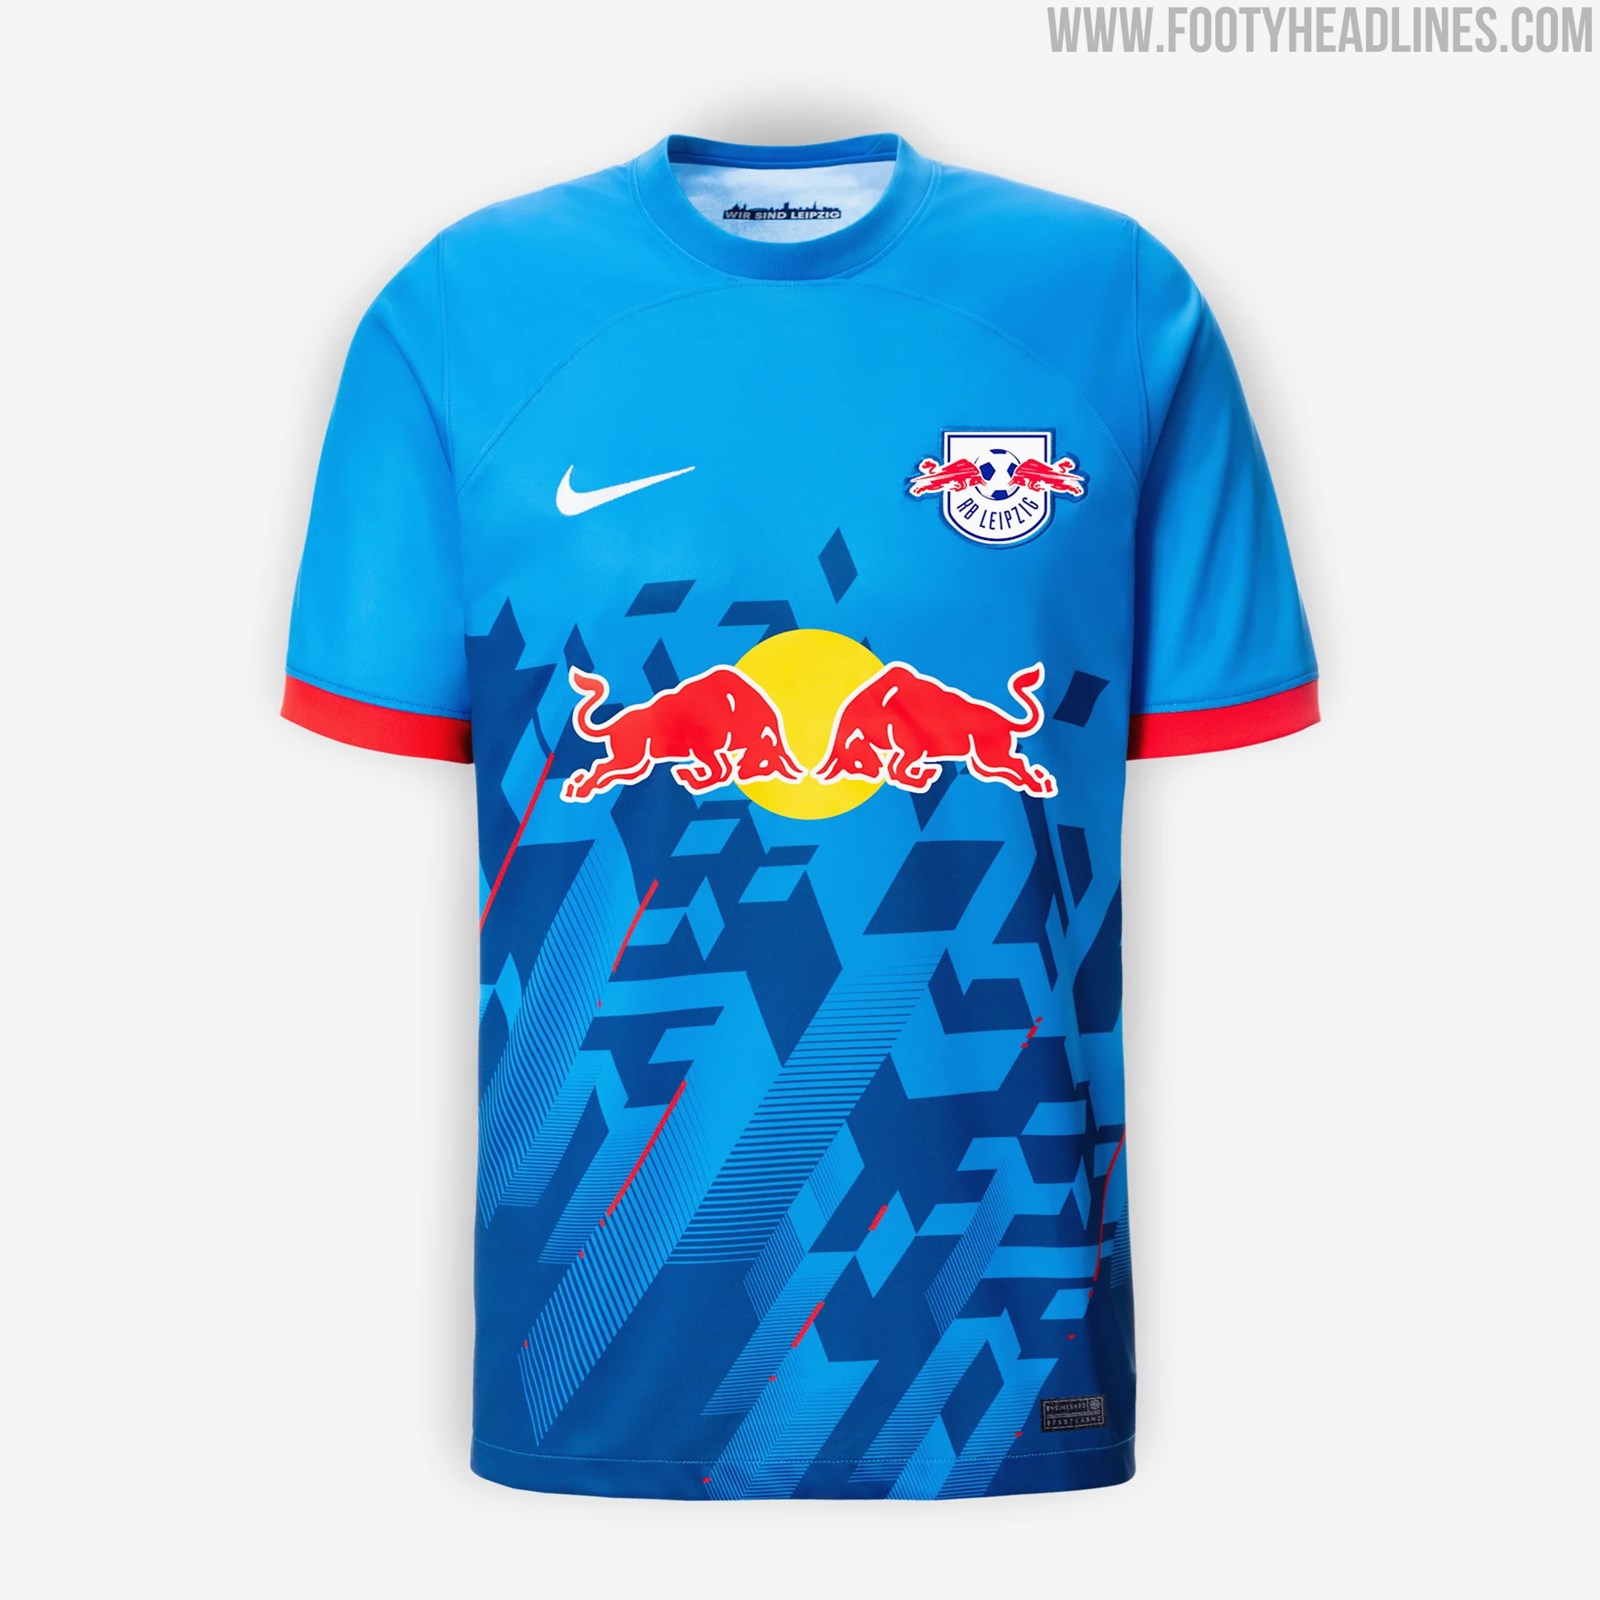 LEIPZIG 3RD KIT 22/23 ⚽️ ⏩⏩⏩ Swipe left for details 🔵 ORDER FORM NAME: IG  USERNAME: CONTACT NUMBER: SHIPPING ADDRESS: ORDER AND SIZE :…